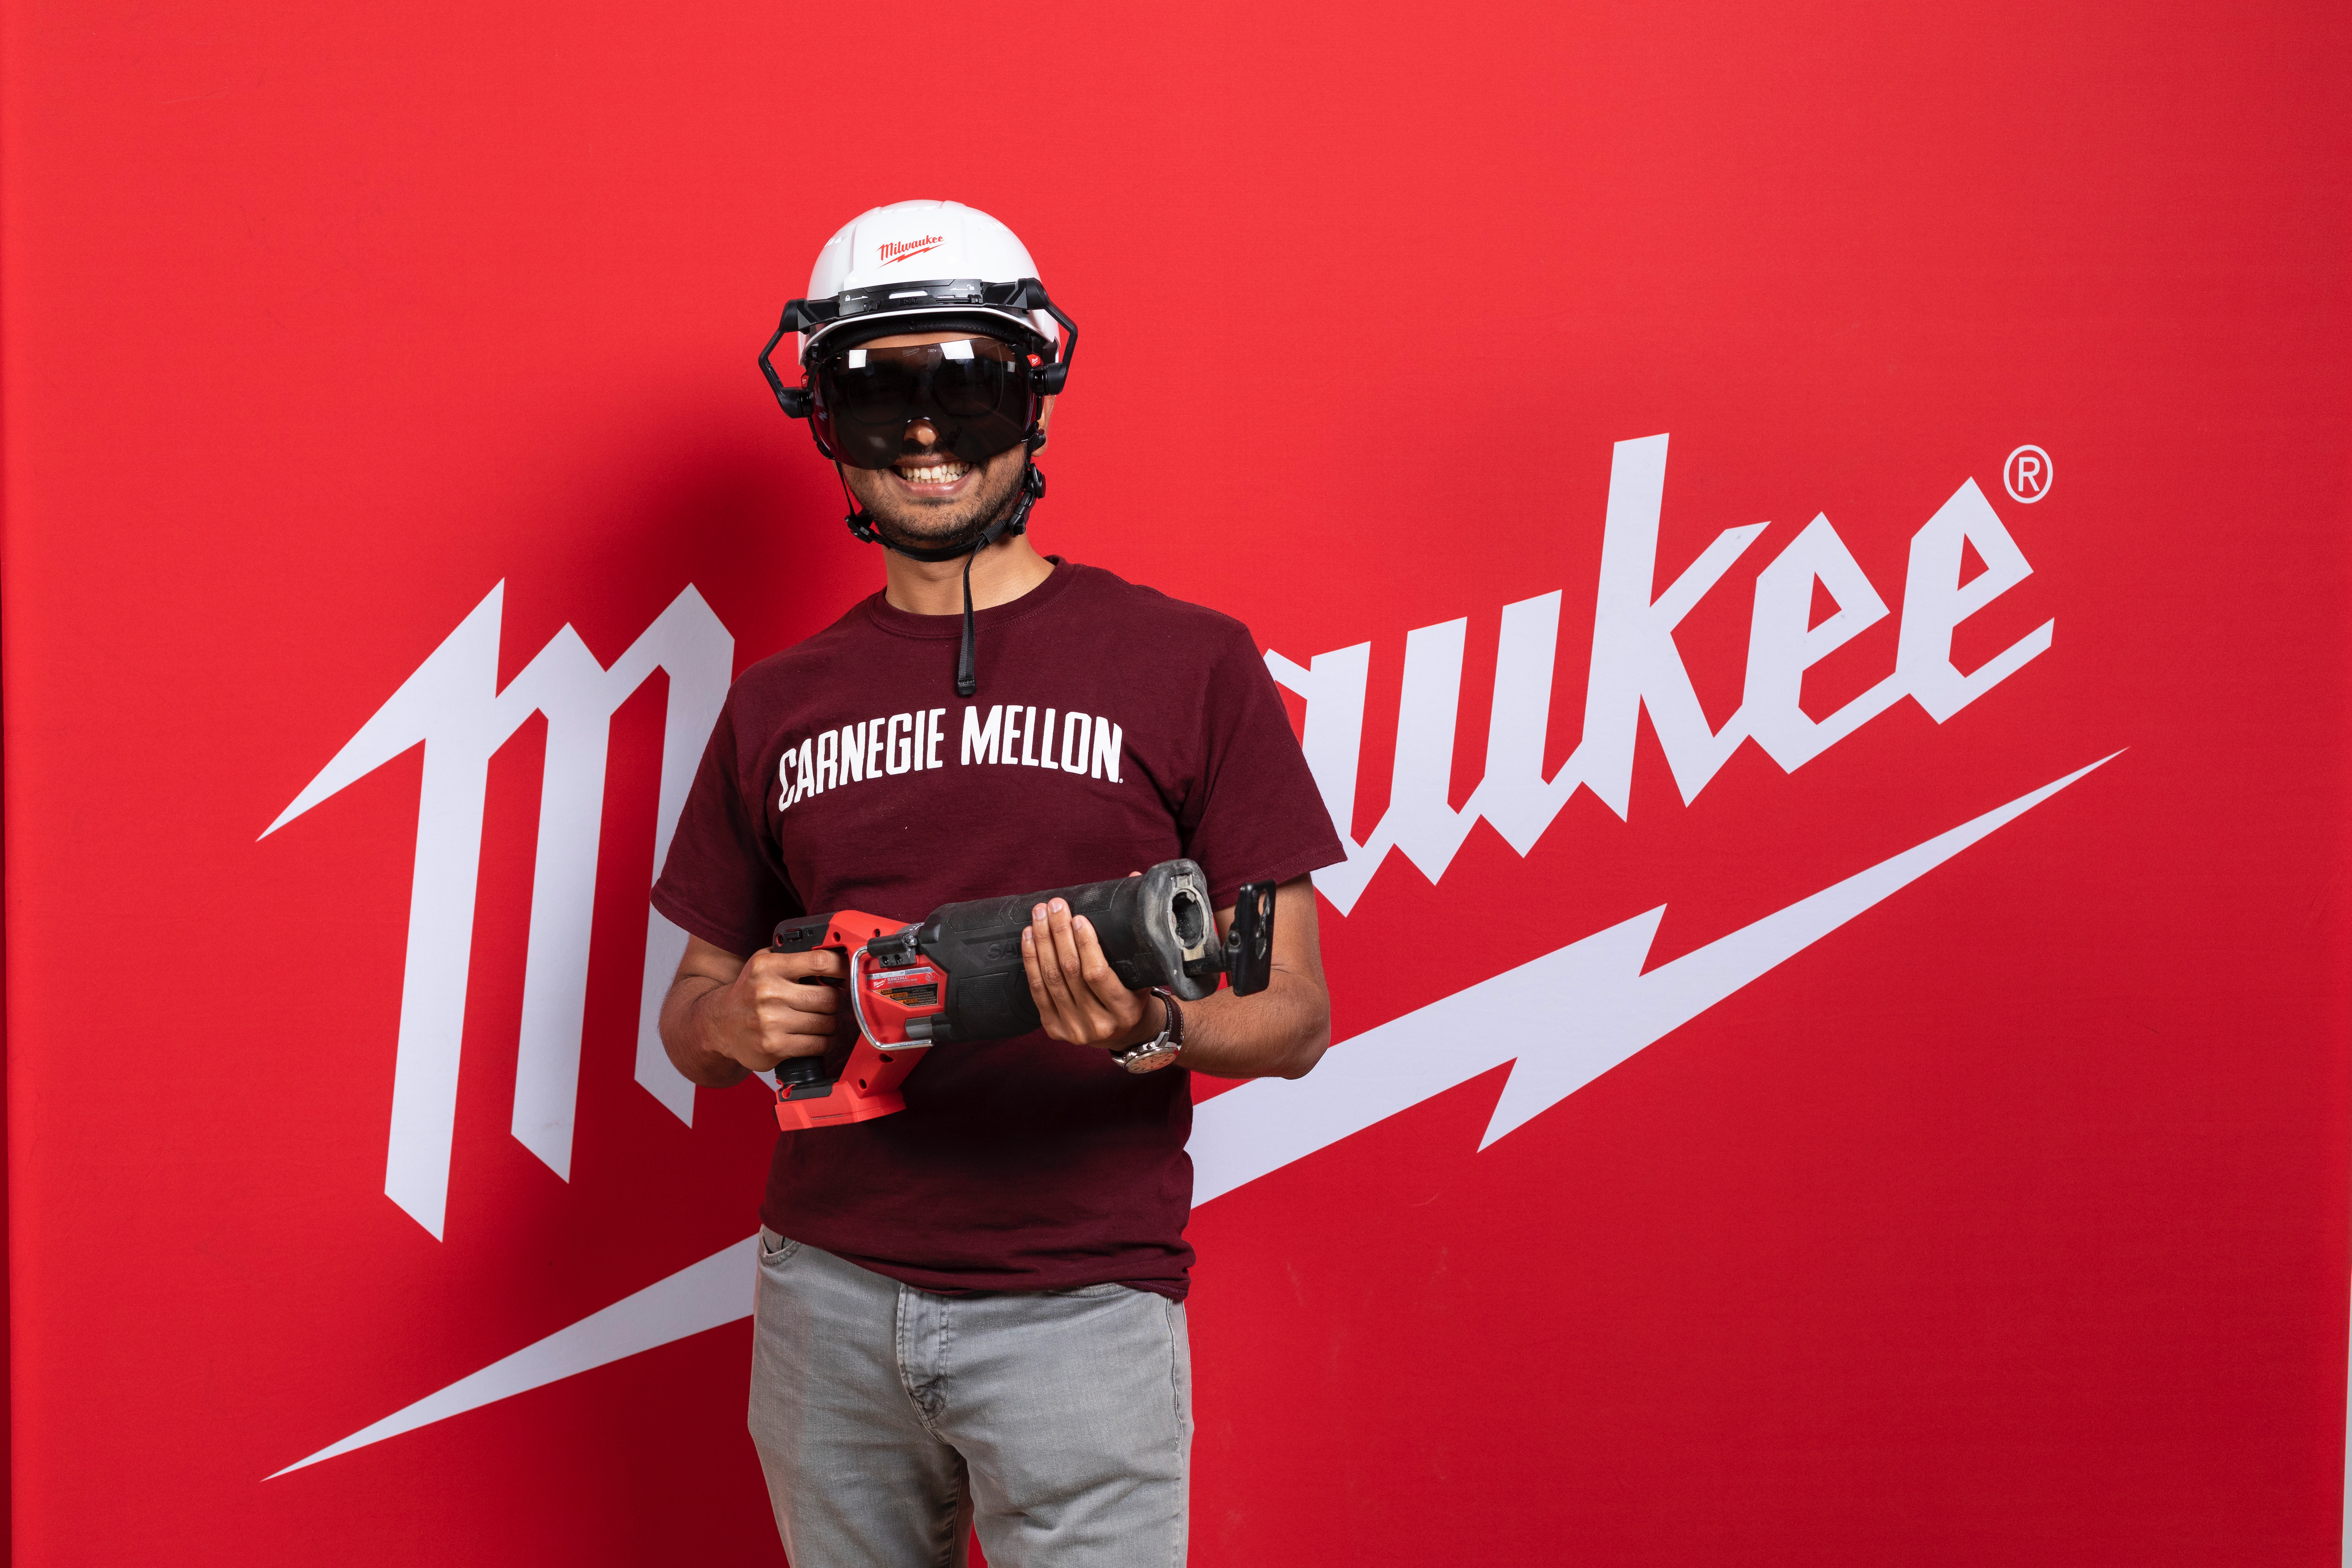 student manas mahaddalkar poses with a power tool in front of a red Milwaukee Tool banner